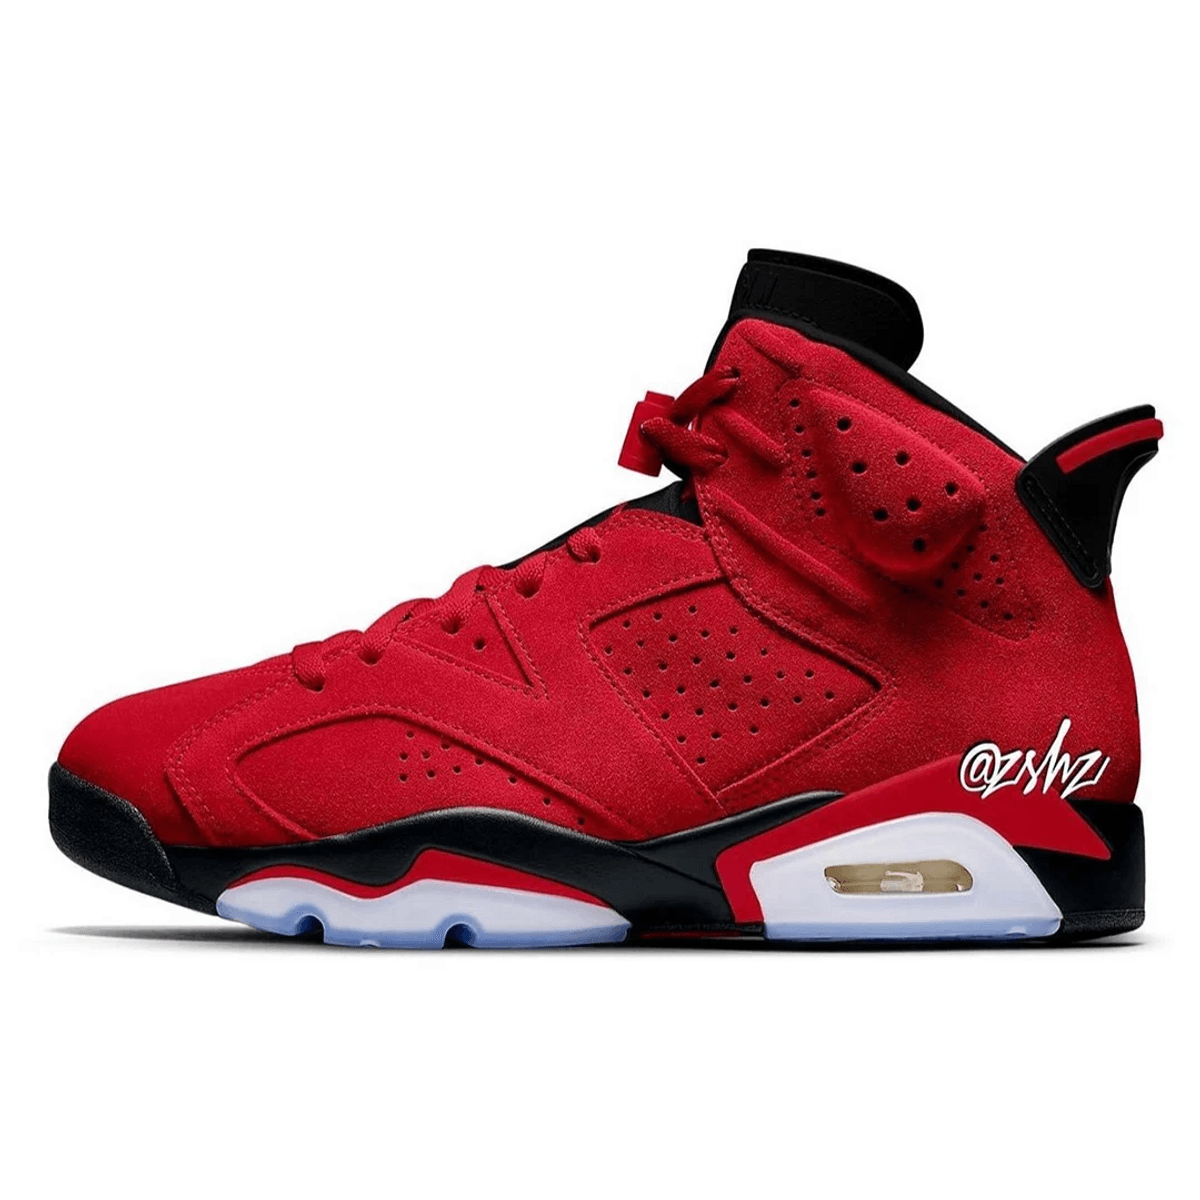 The Air Jordan 6 Toro Varsity Red is Releasing With Inspiration From the Classic Raging Bulls Silhouette